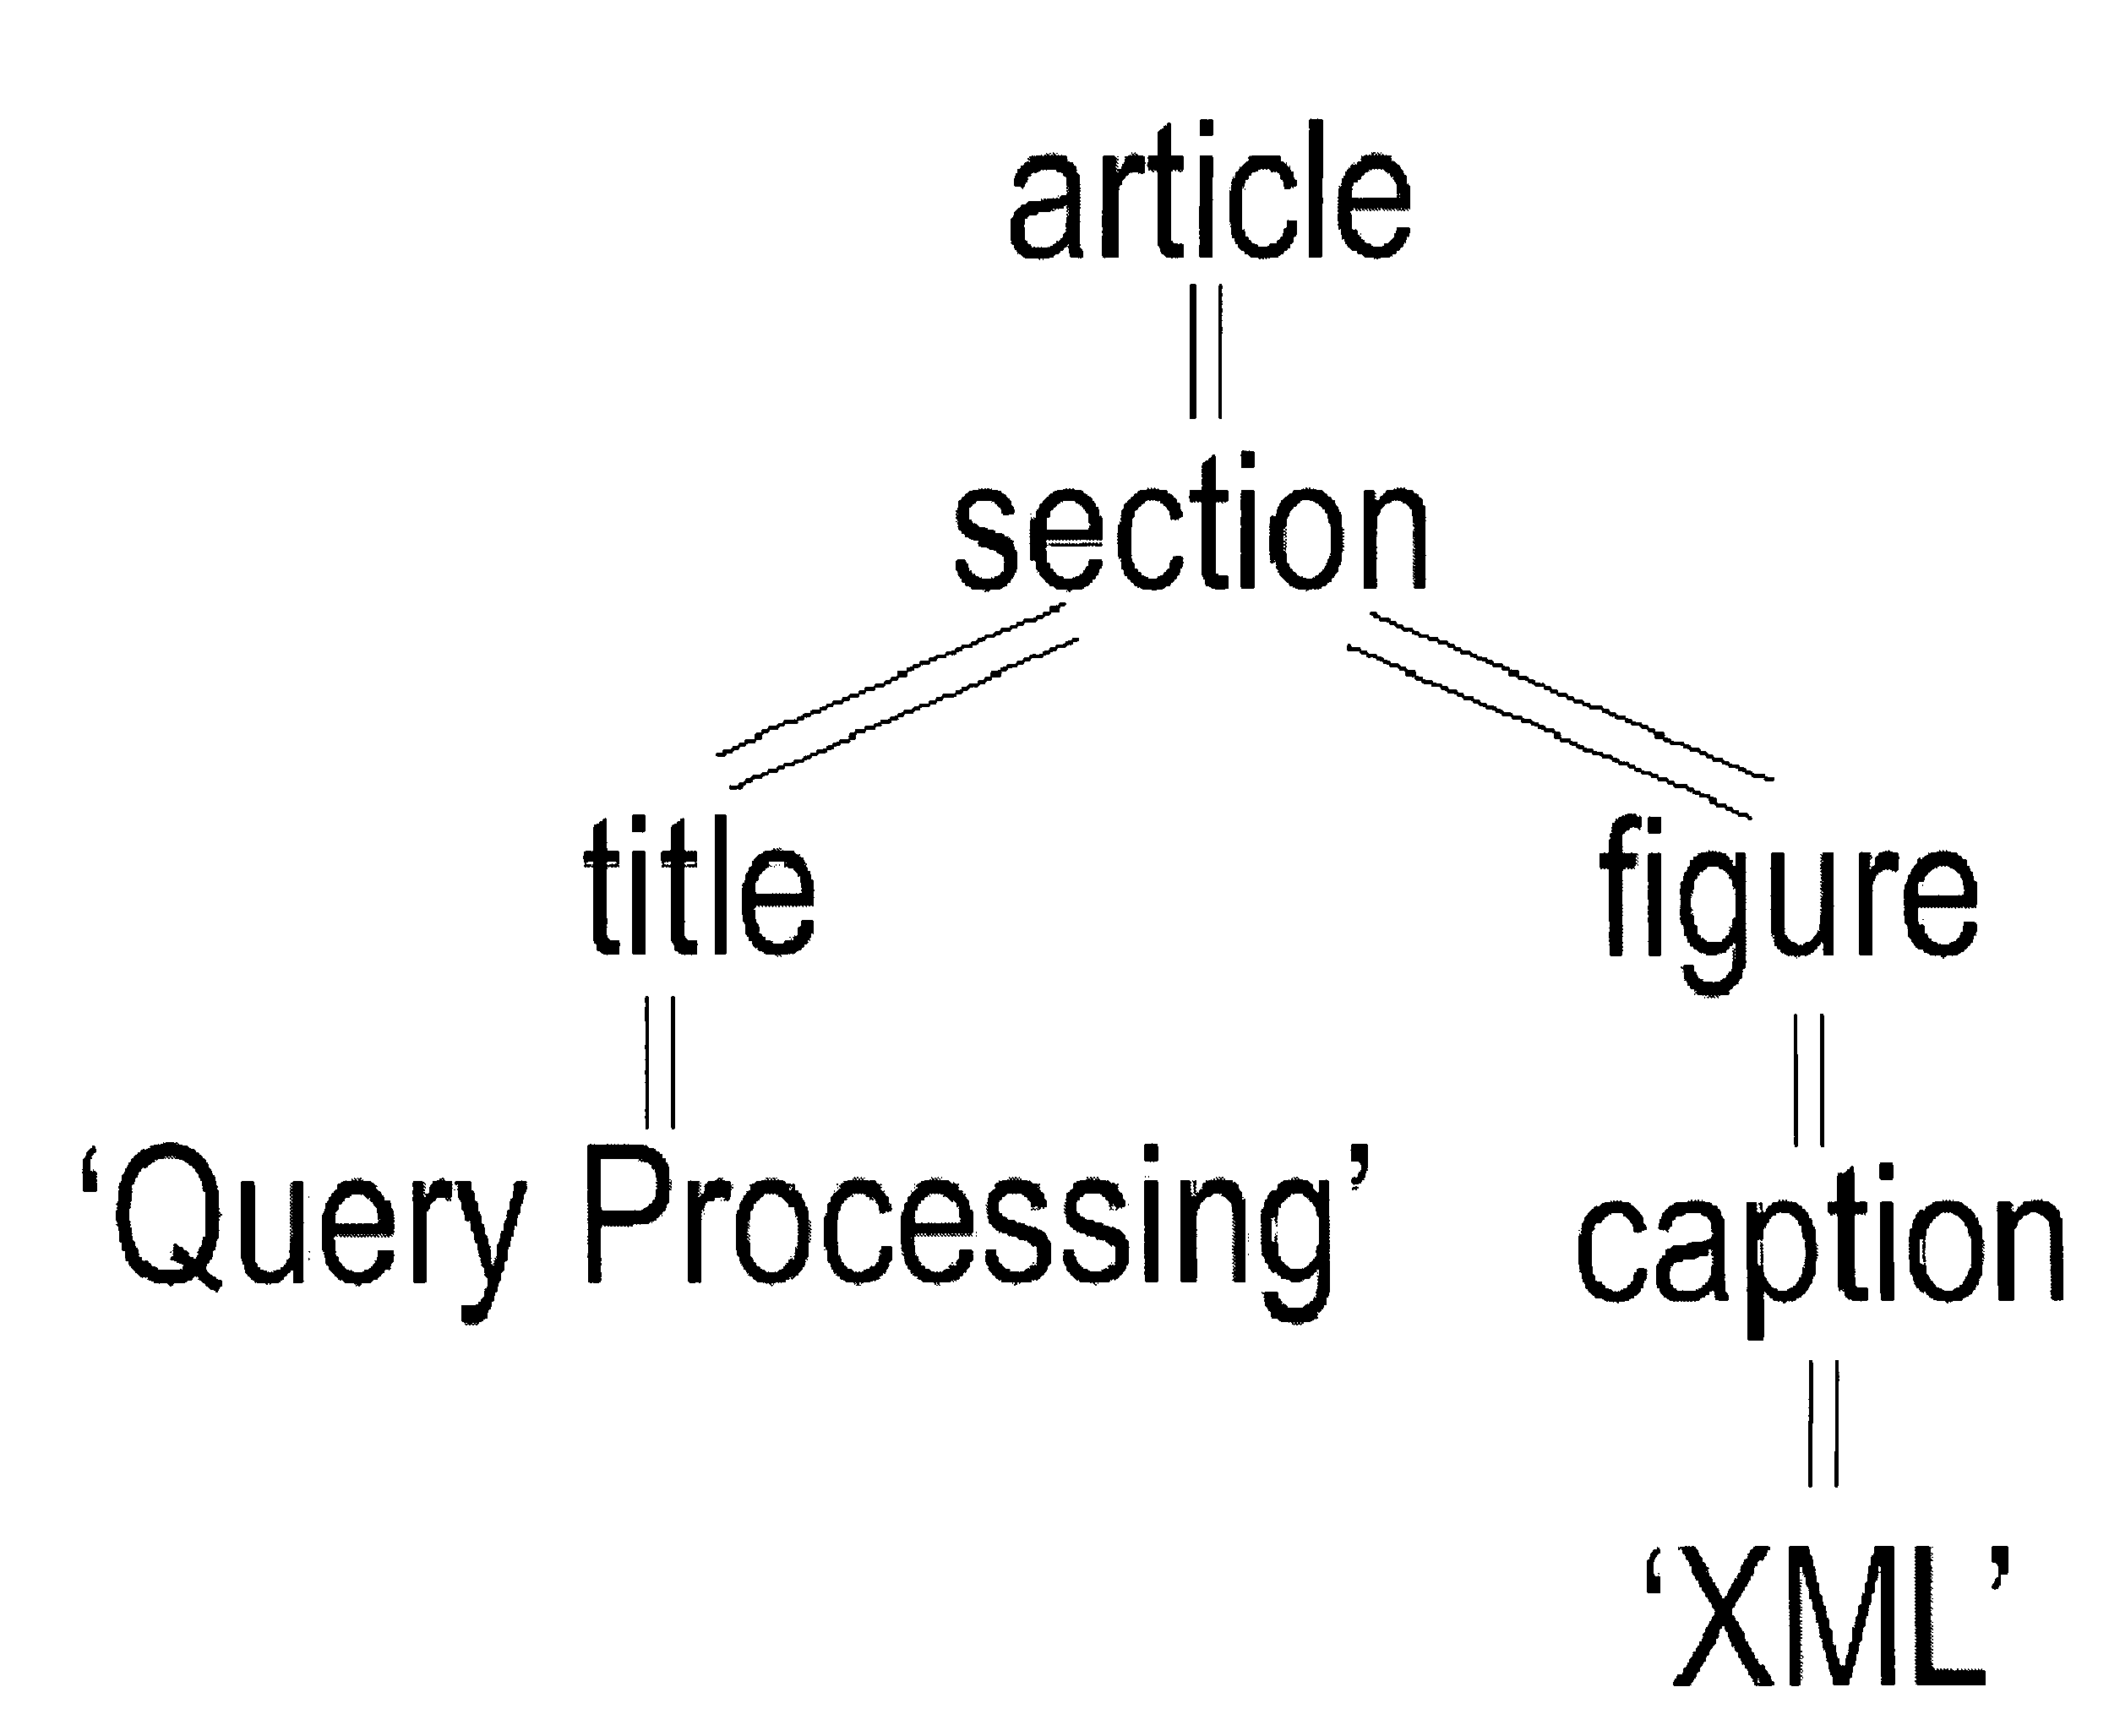 Virtual cursors for XML joins